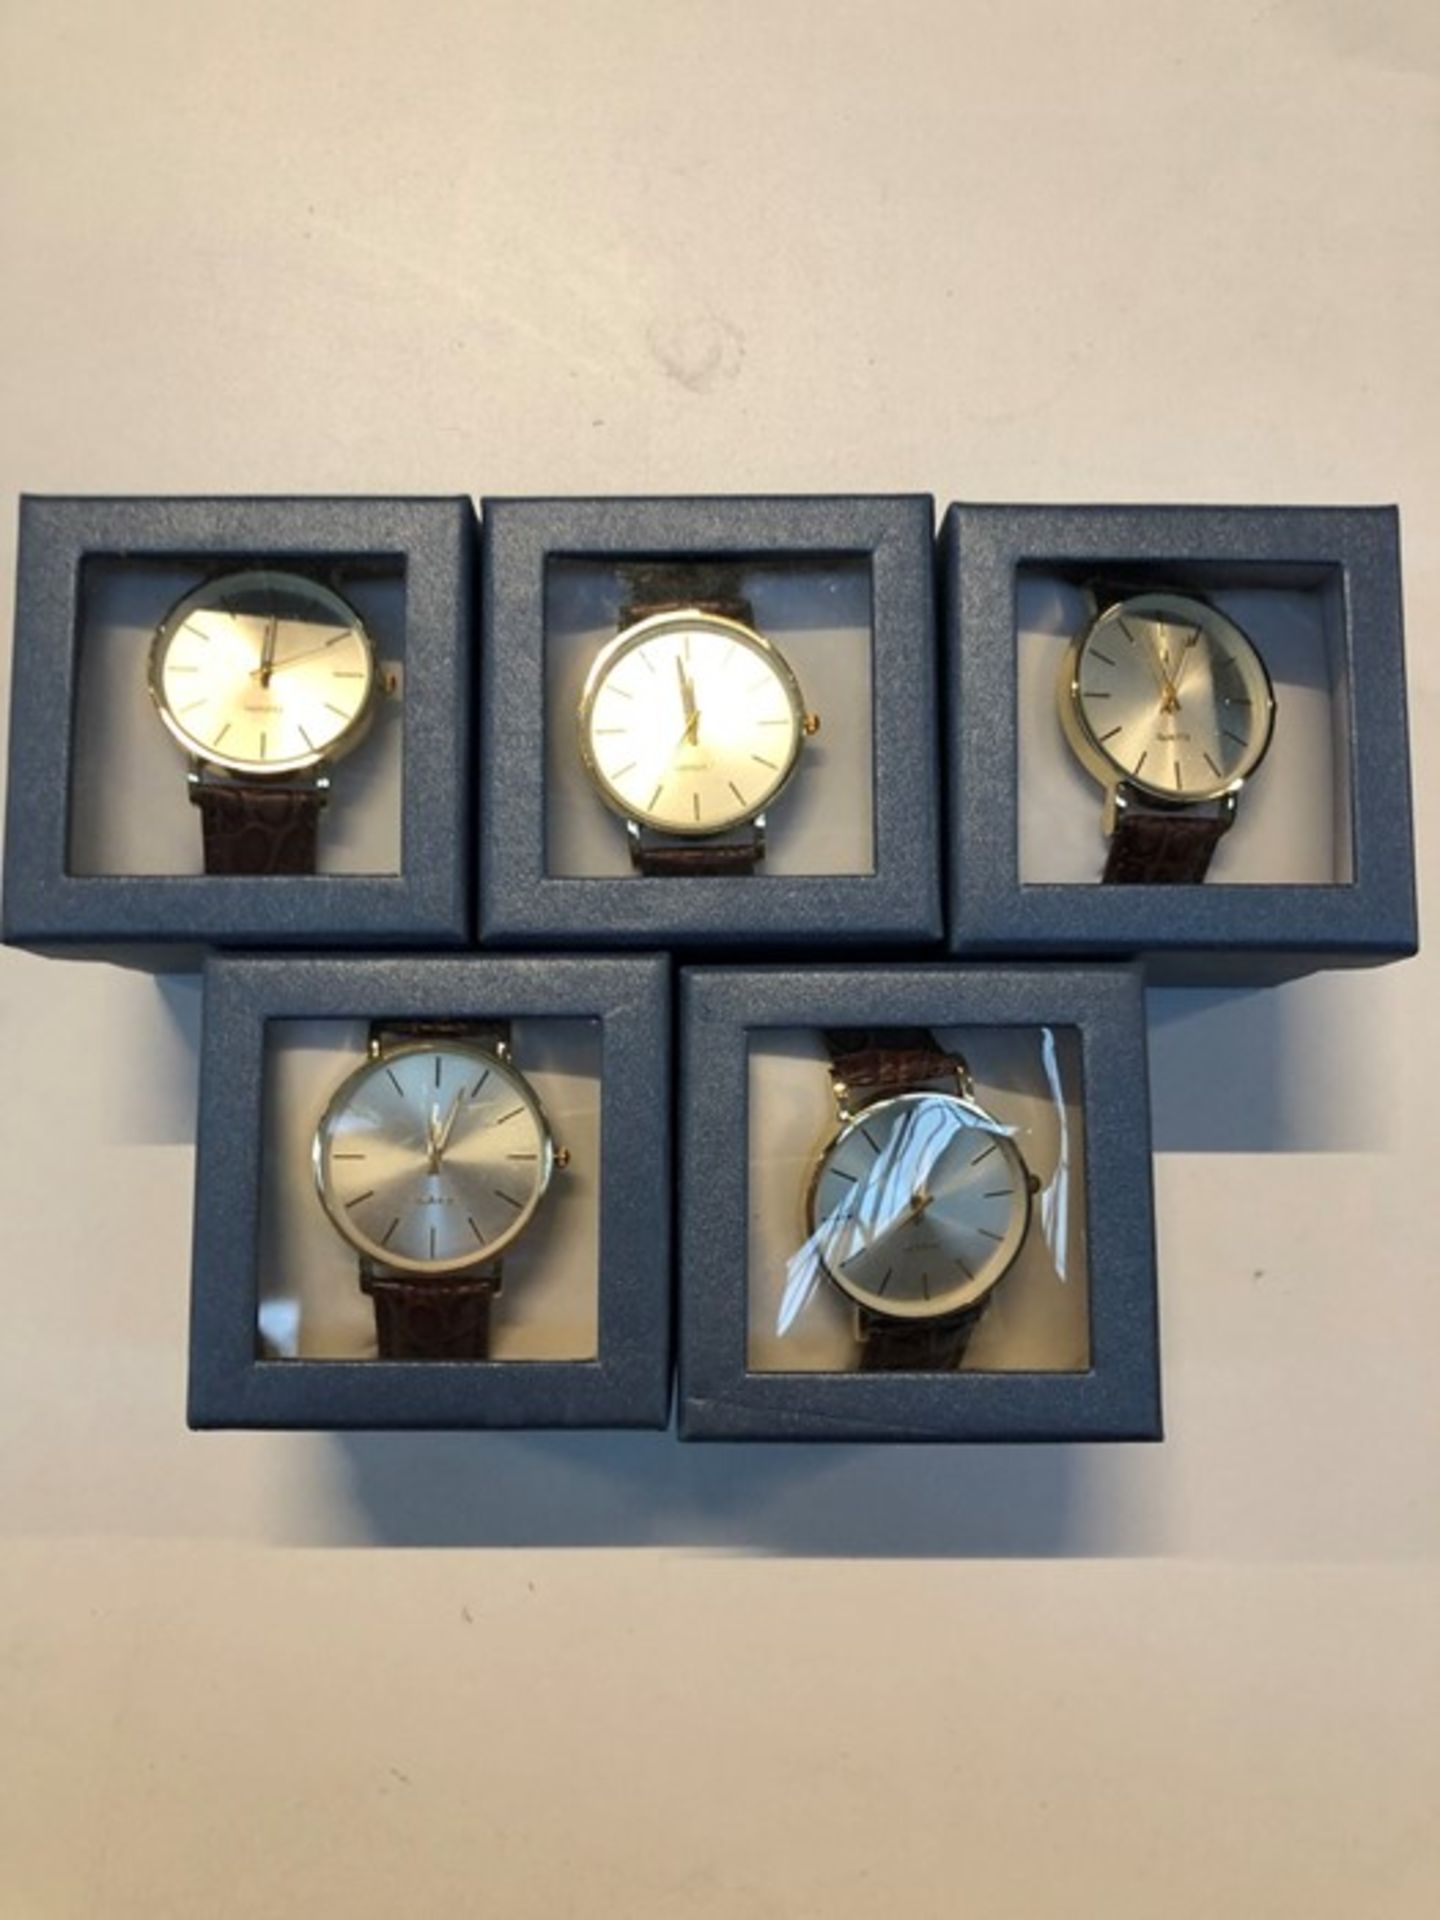 1 LOT TO CONTAIN 5 BOXED GENTS QUARTZ WATCHES / RRP £149.75 (PUBLIC VIEWING AVAILABLE)